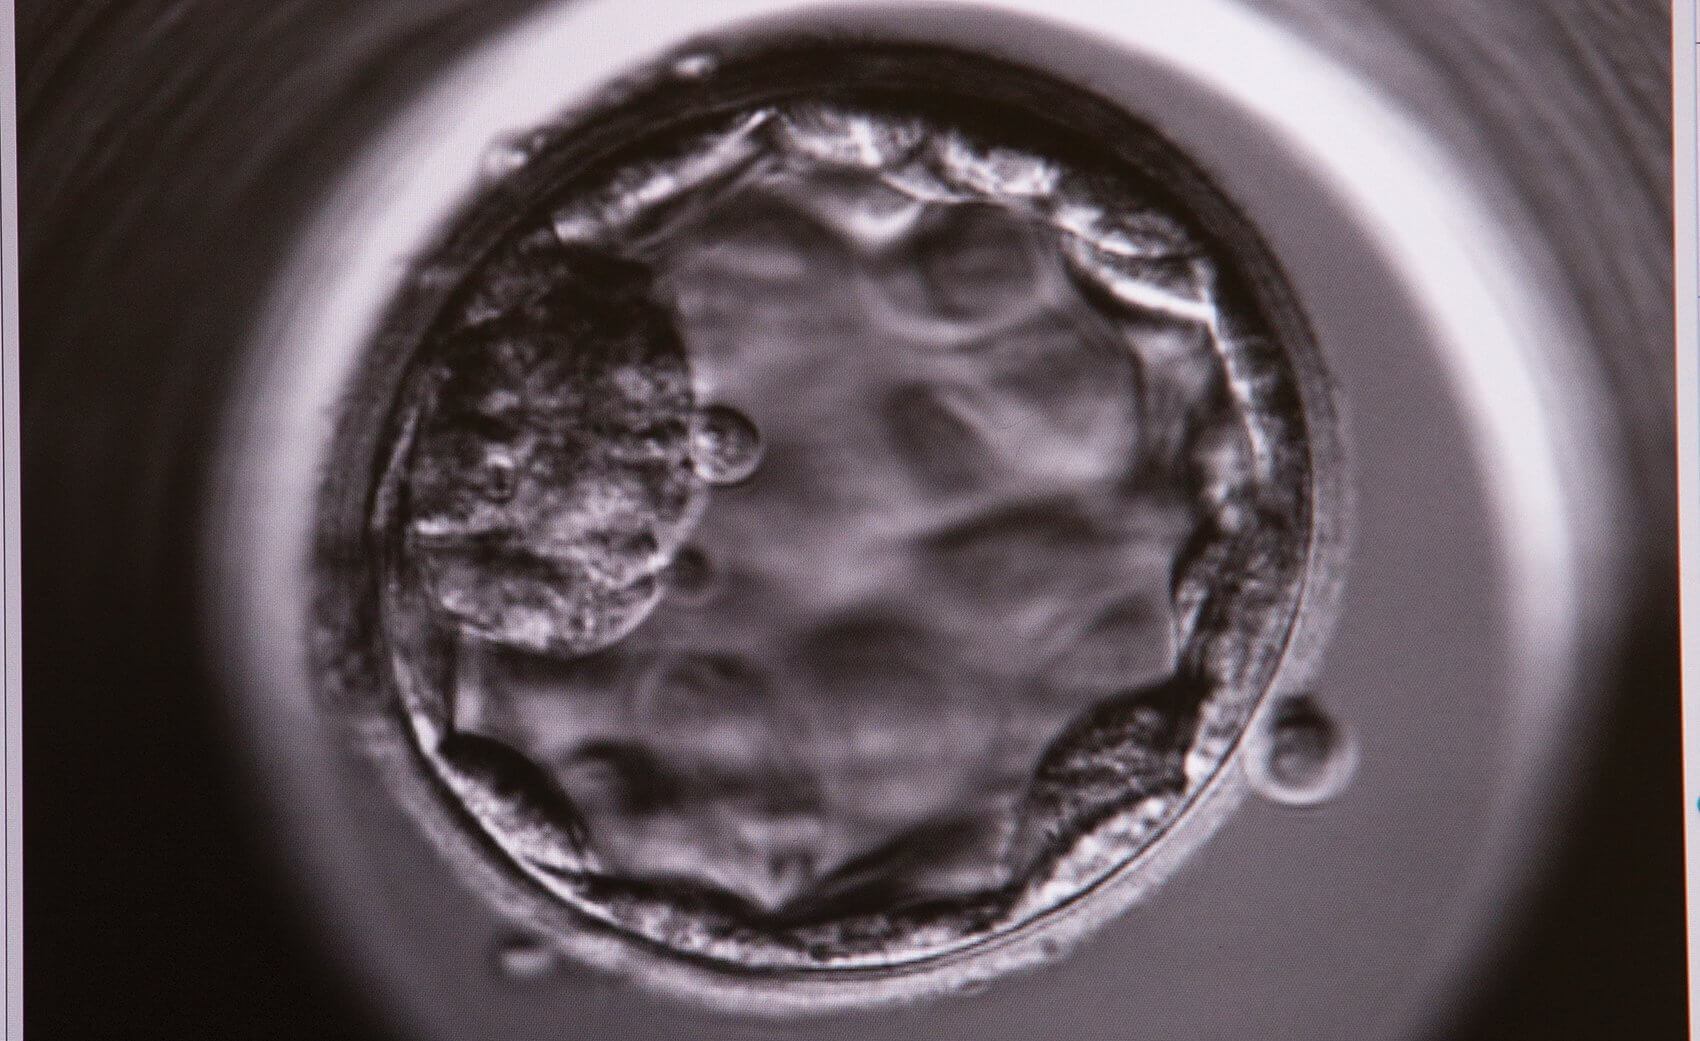 A five-day-old embryo, or blastocyst, contains two types of cells—the inner cell mass, which will develop into the fetus, and the trophectoderm cells, which will develop into the placenta.